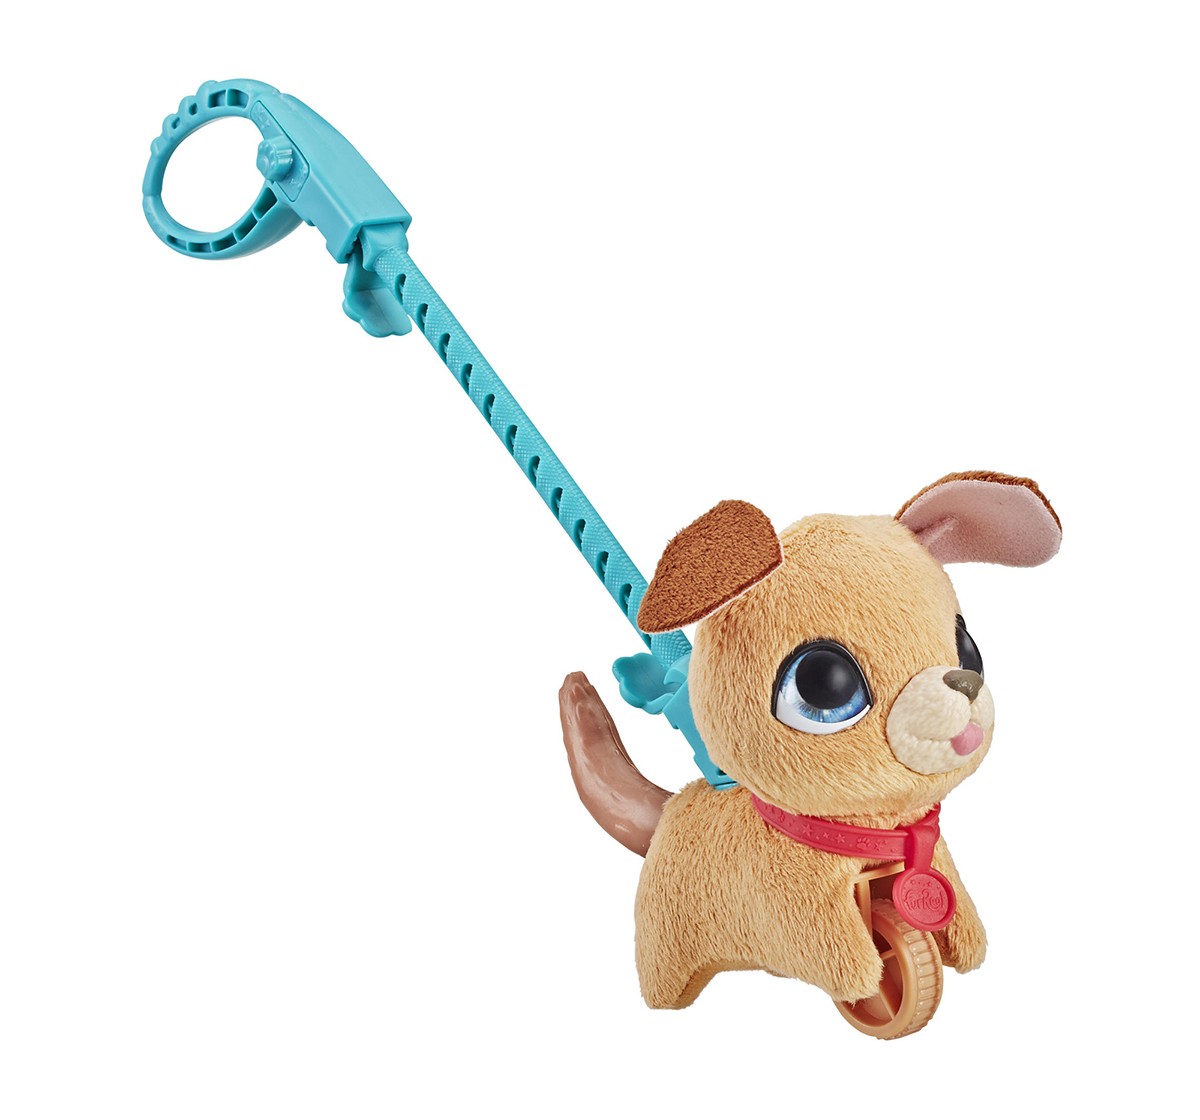 Furreal Friends Walkalots Lil’ Wags Assorted Interactive Soft Toys for Kids age 4Y+ - 20.955 Cm 